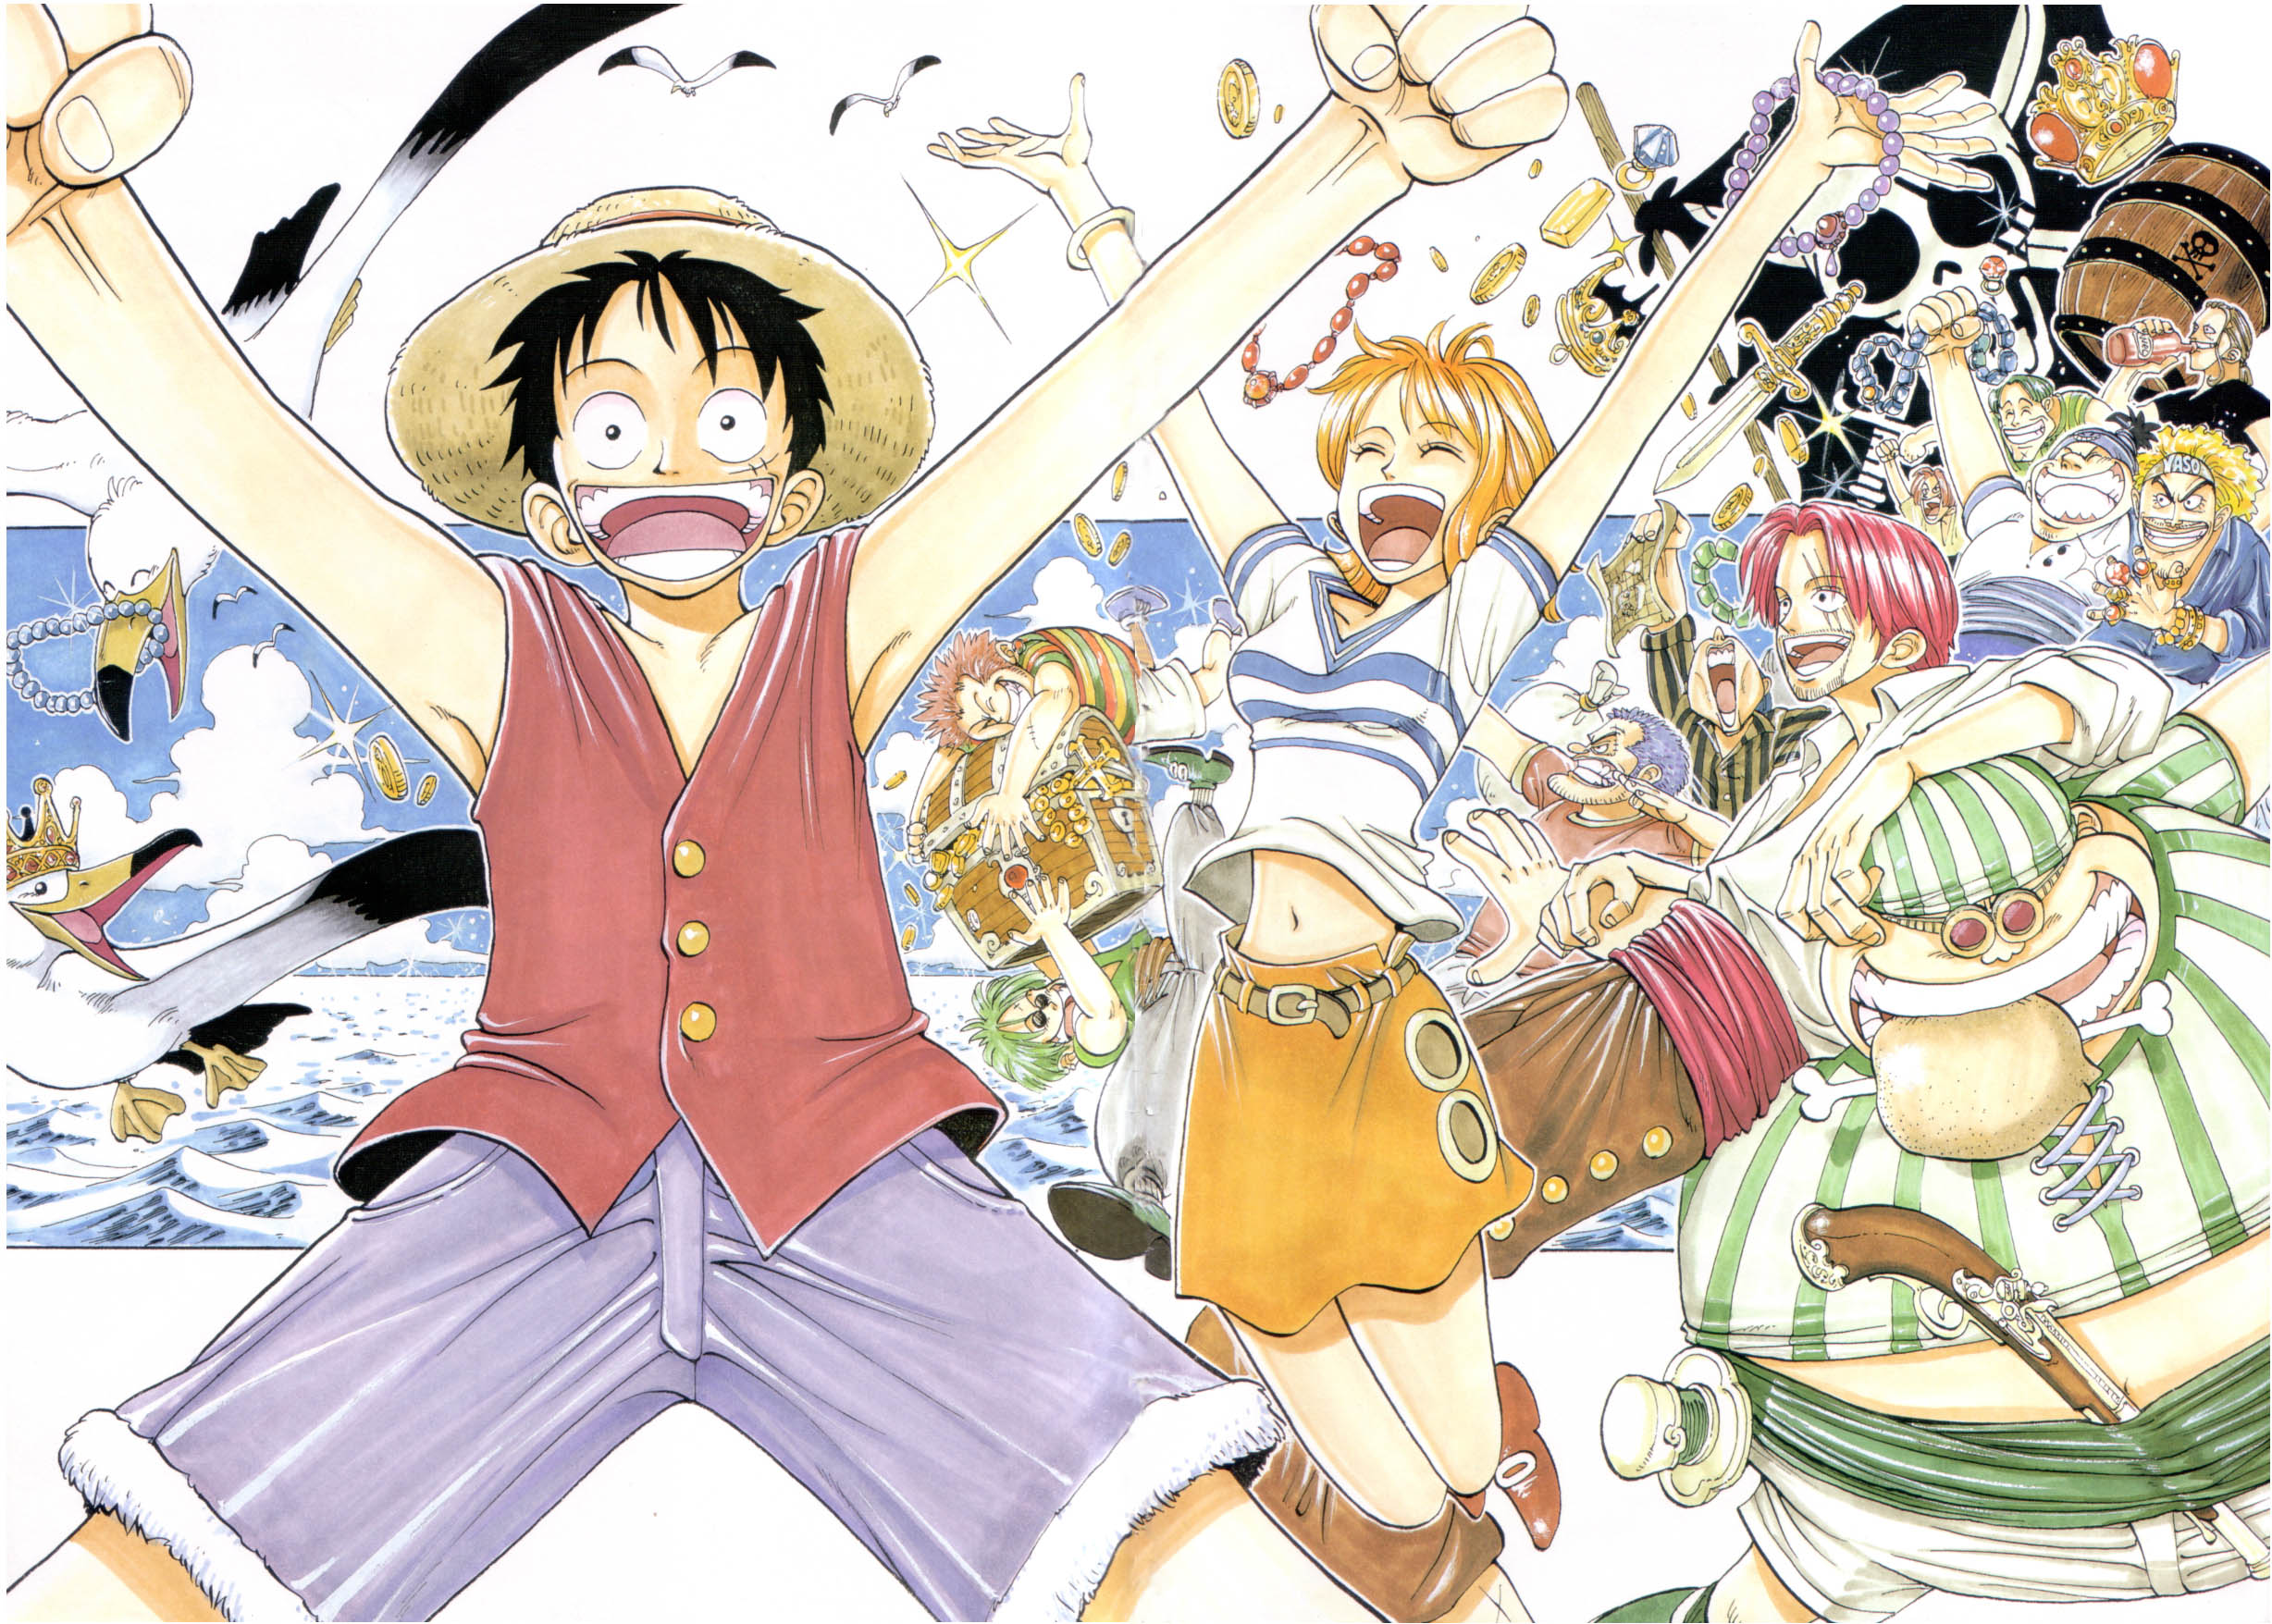 1354948 One Piece HD, Shanks (One Piece), Gol D. Roger, Monkey D. Luffy -  Rare Gallery HD Wallpapers